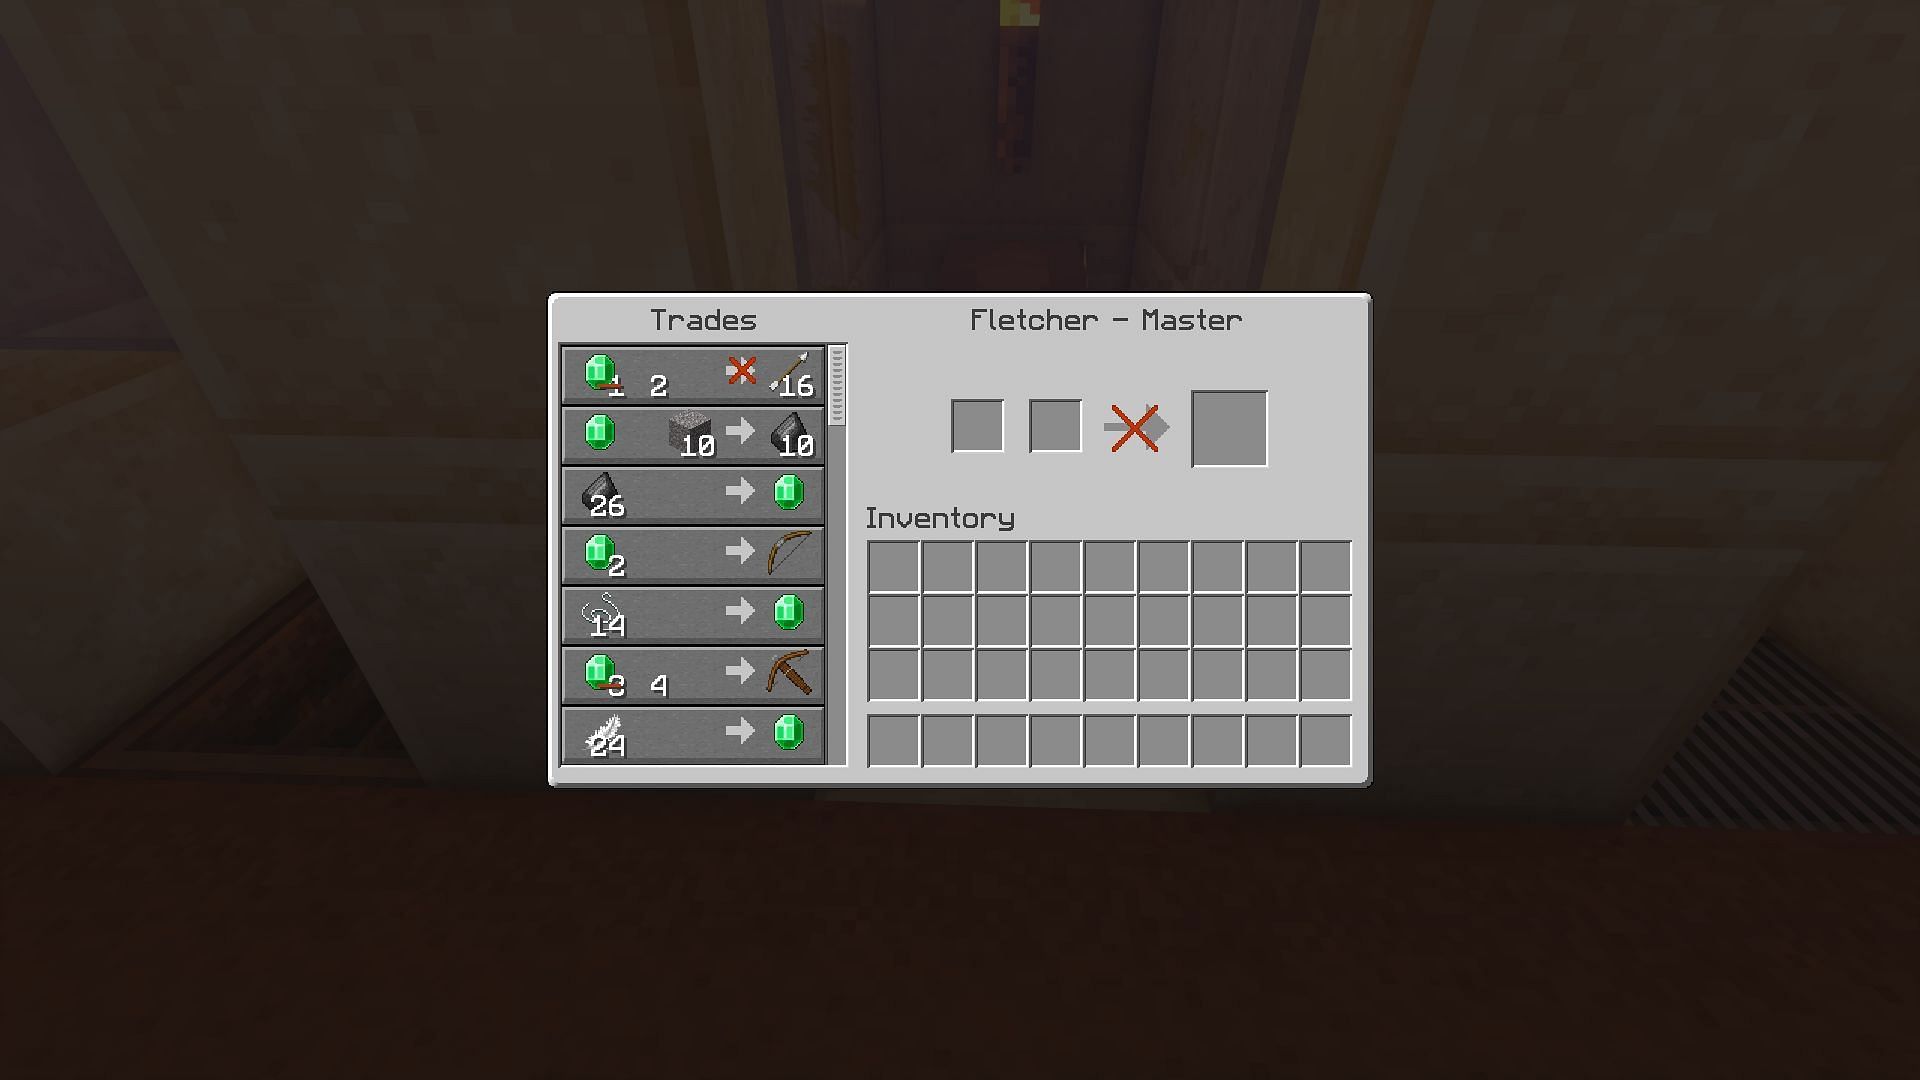 The trades offered by a fletcher (Image via Minecraft)